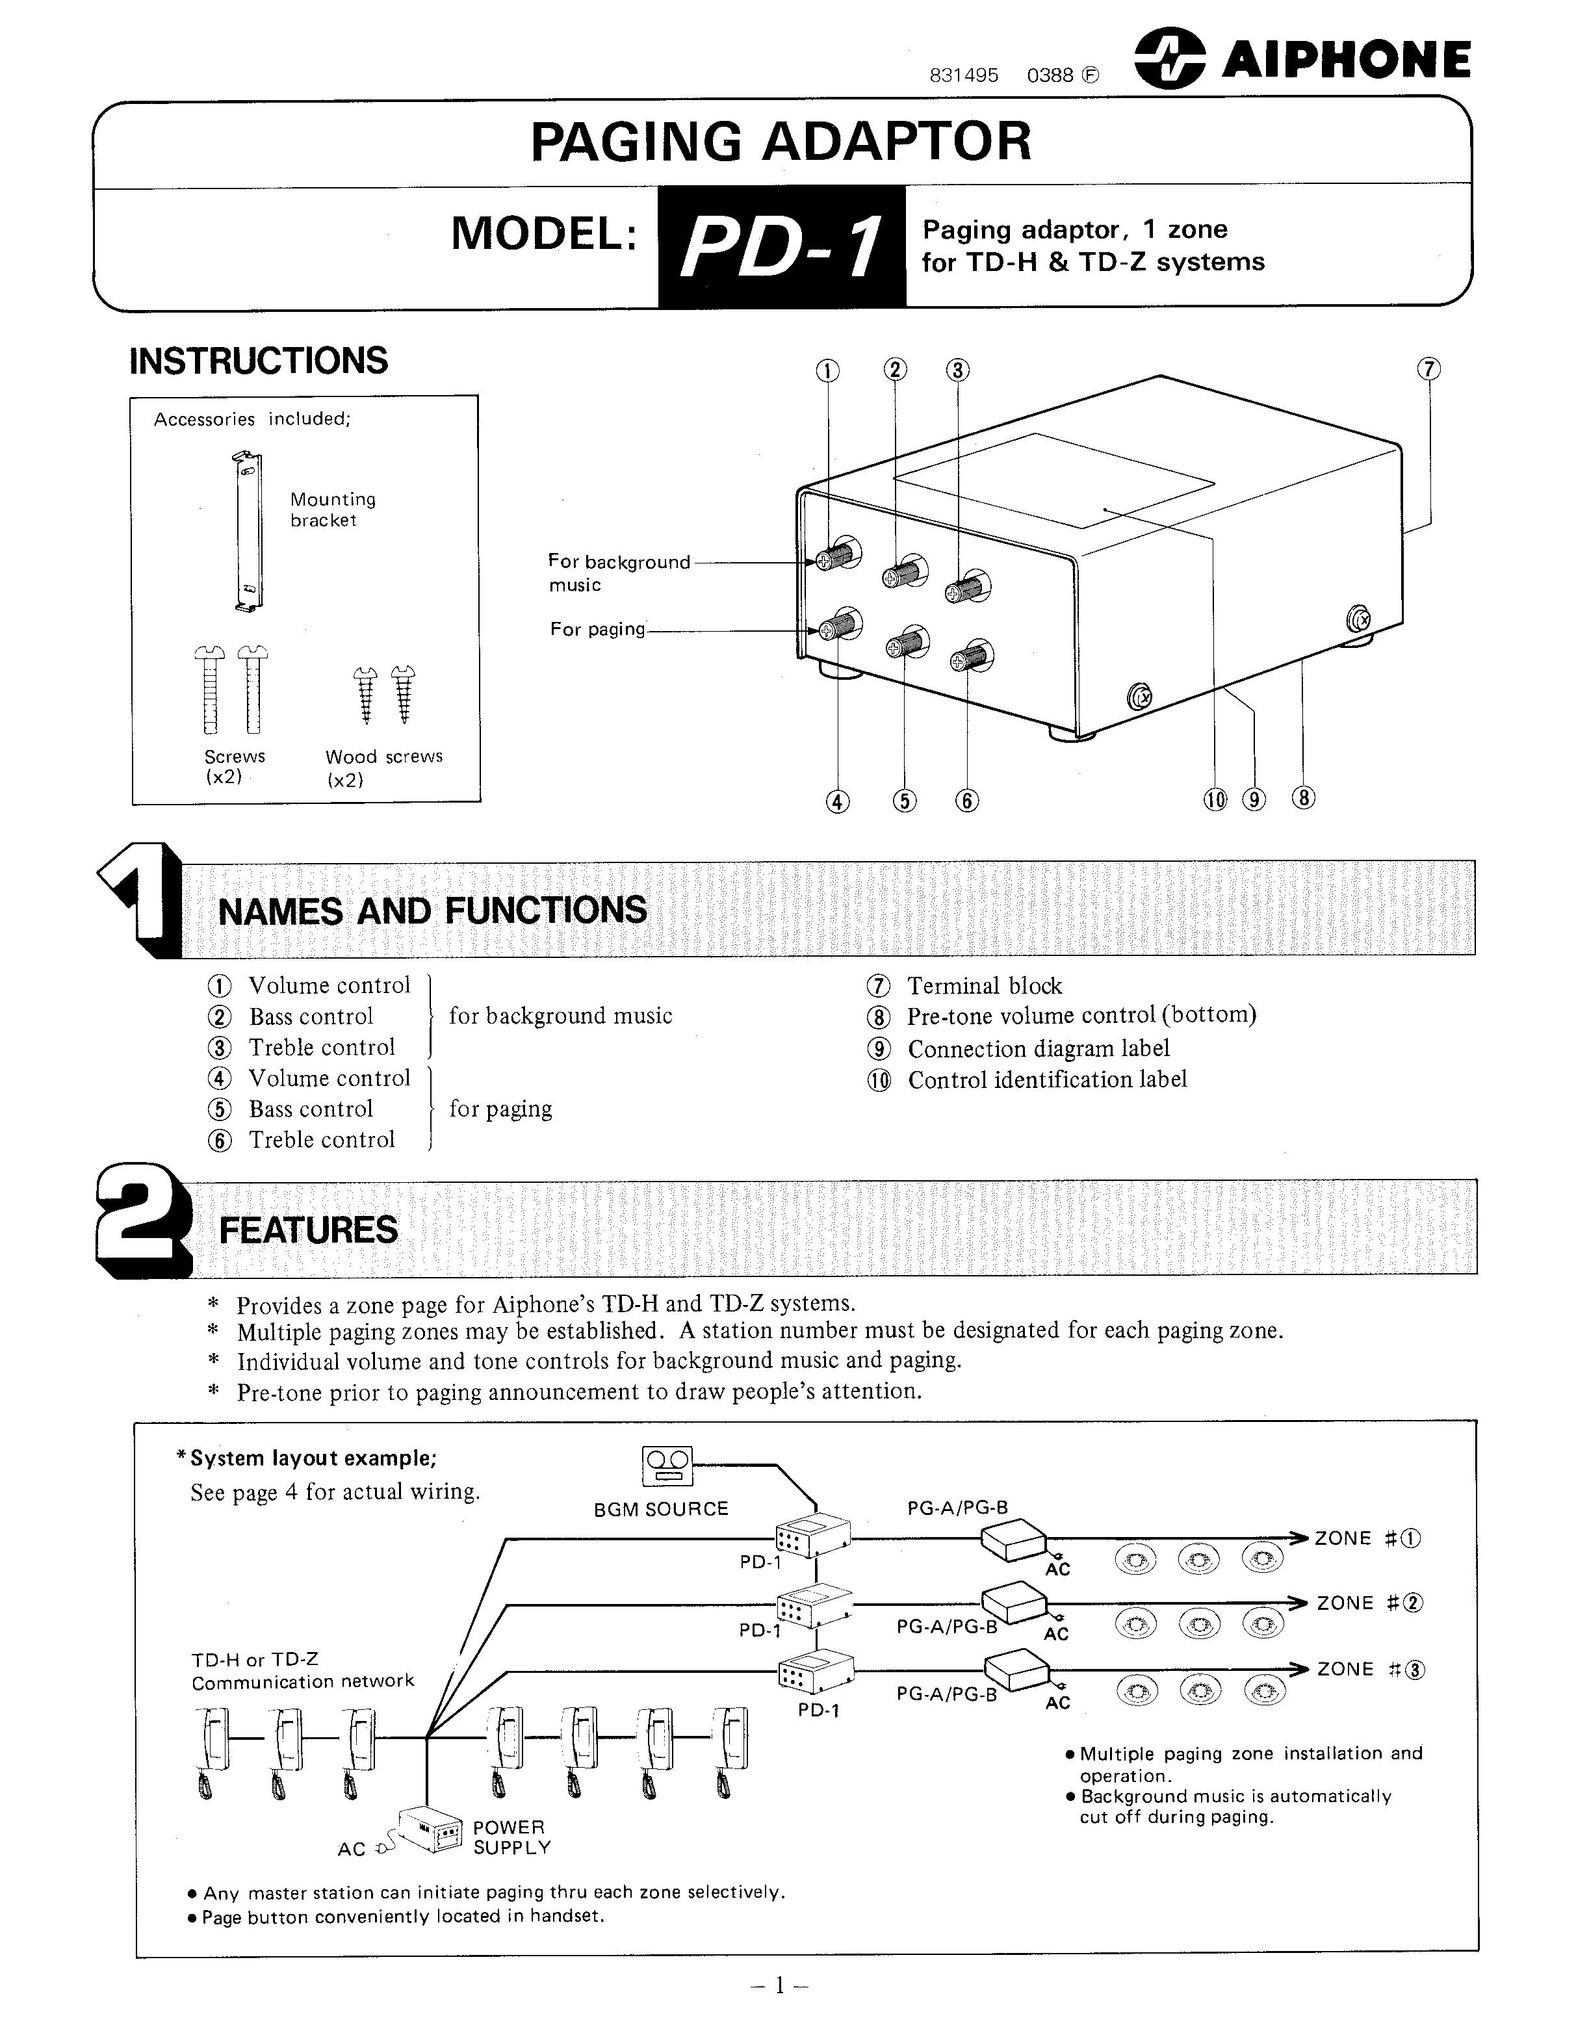 Aiphone PD-1 Network Card User Manual